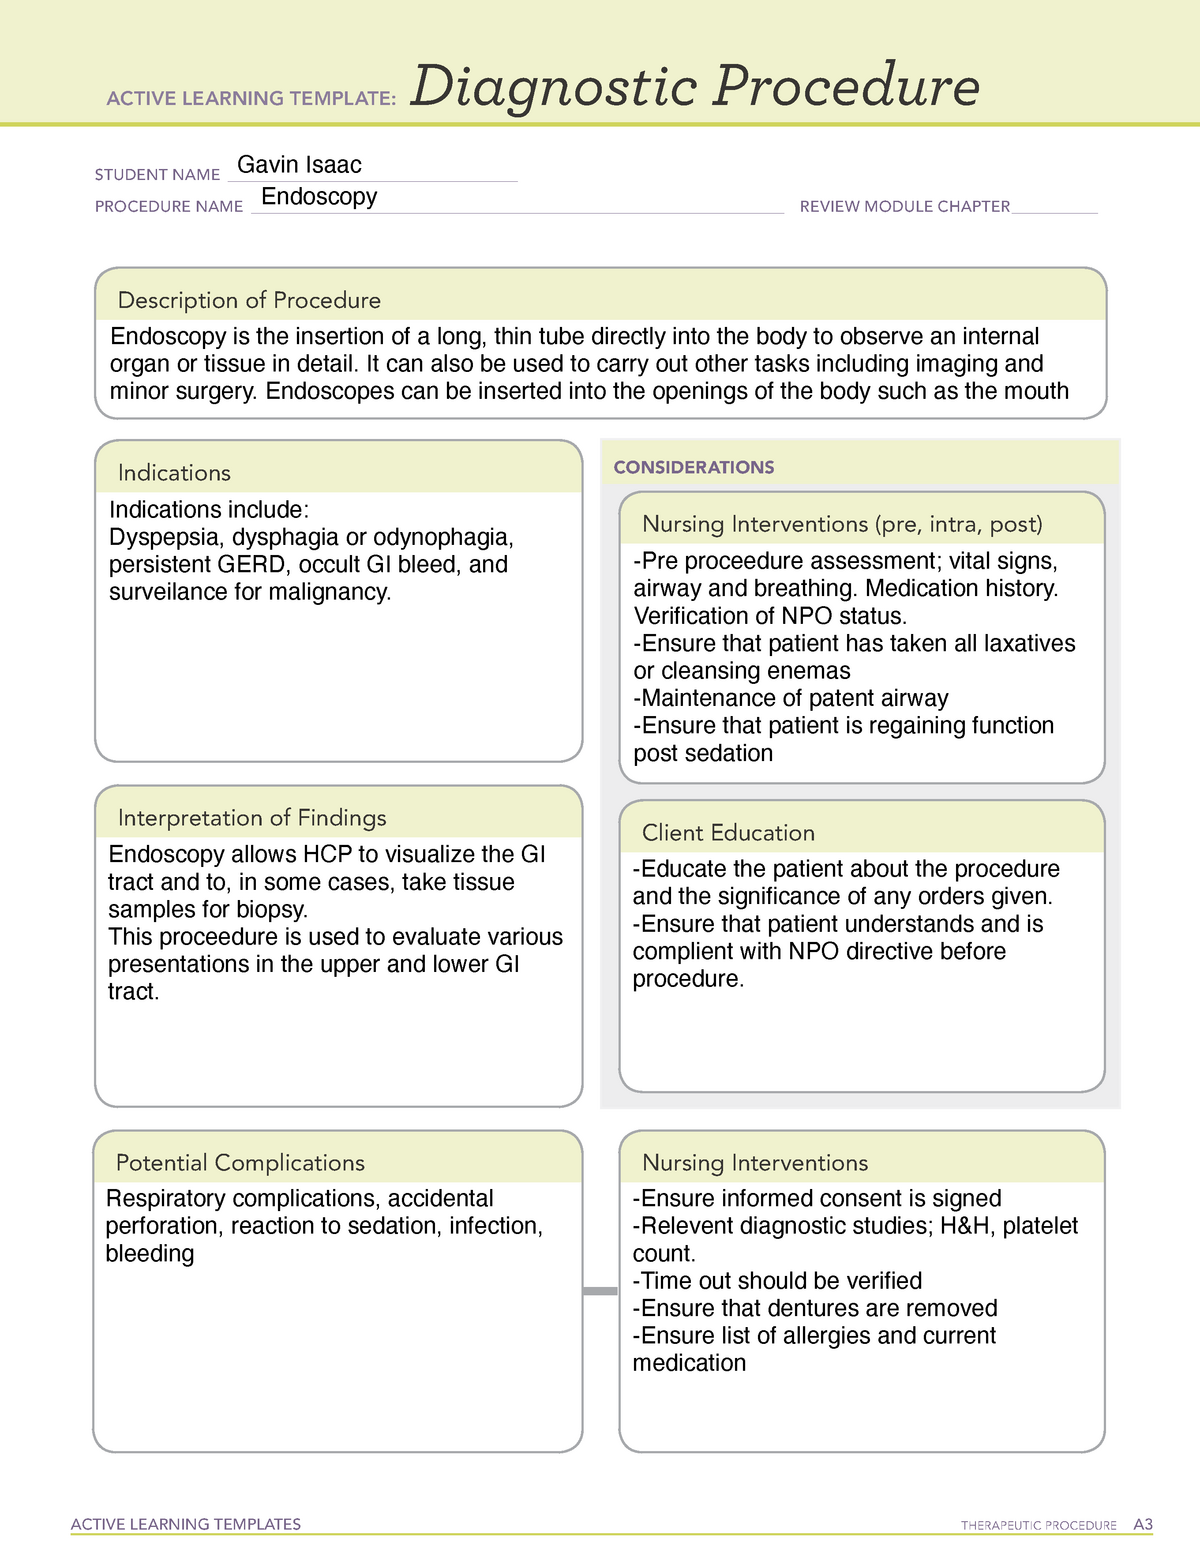 Diagnostic Endoscopy Active Learning Template ACTIVE LEARNING